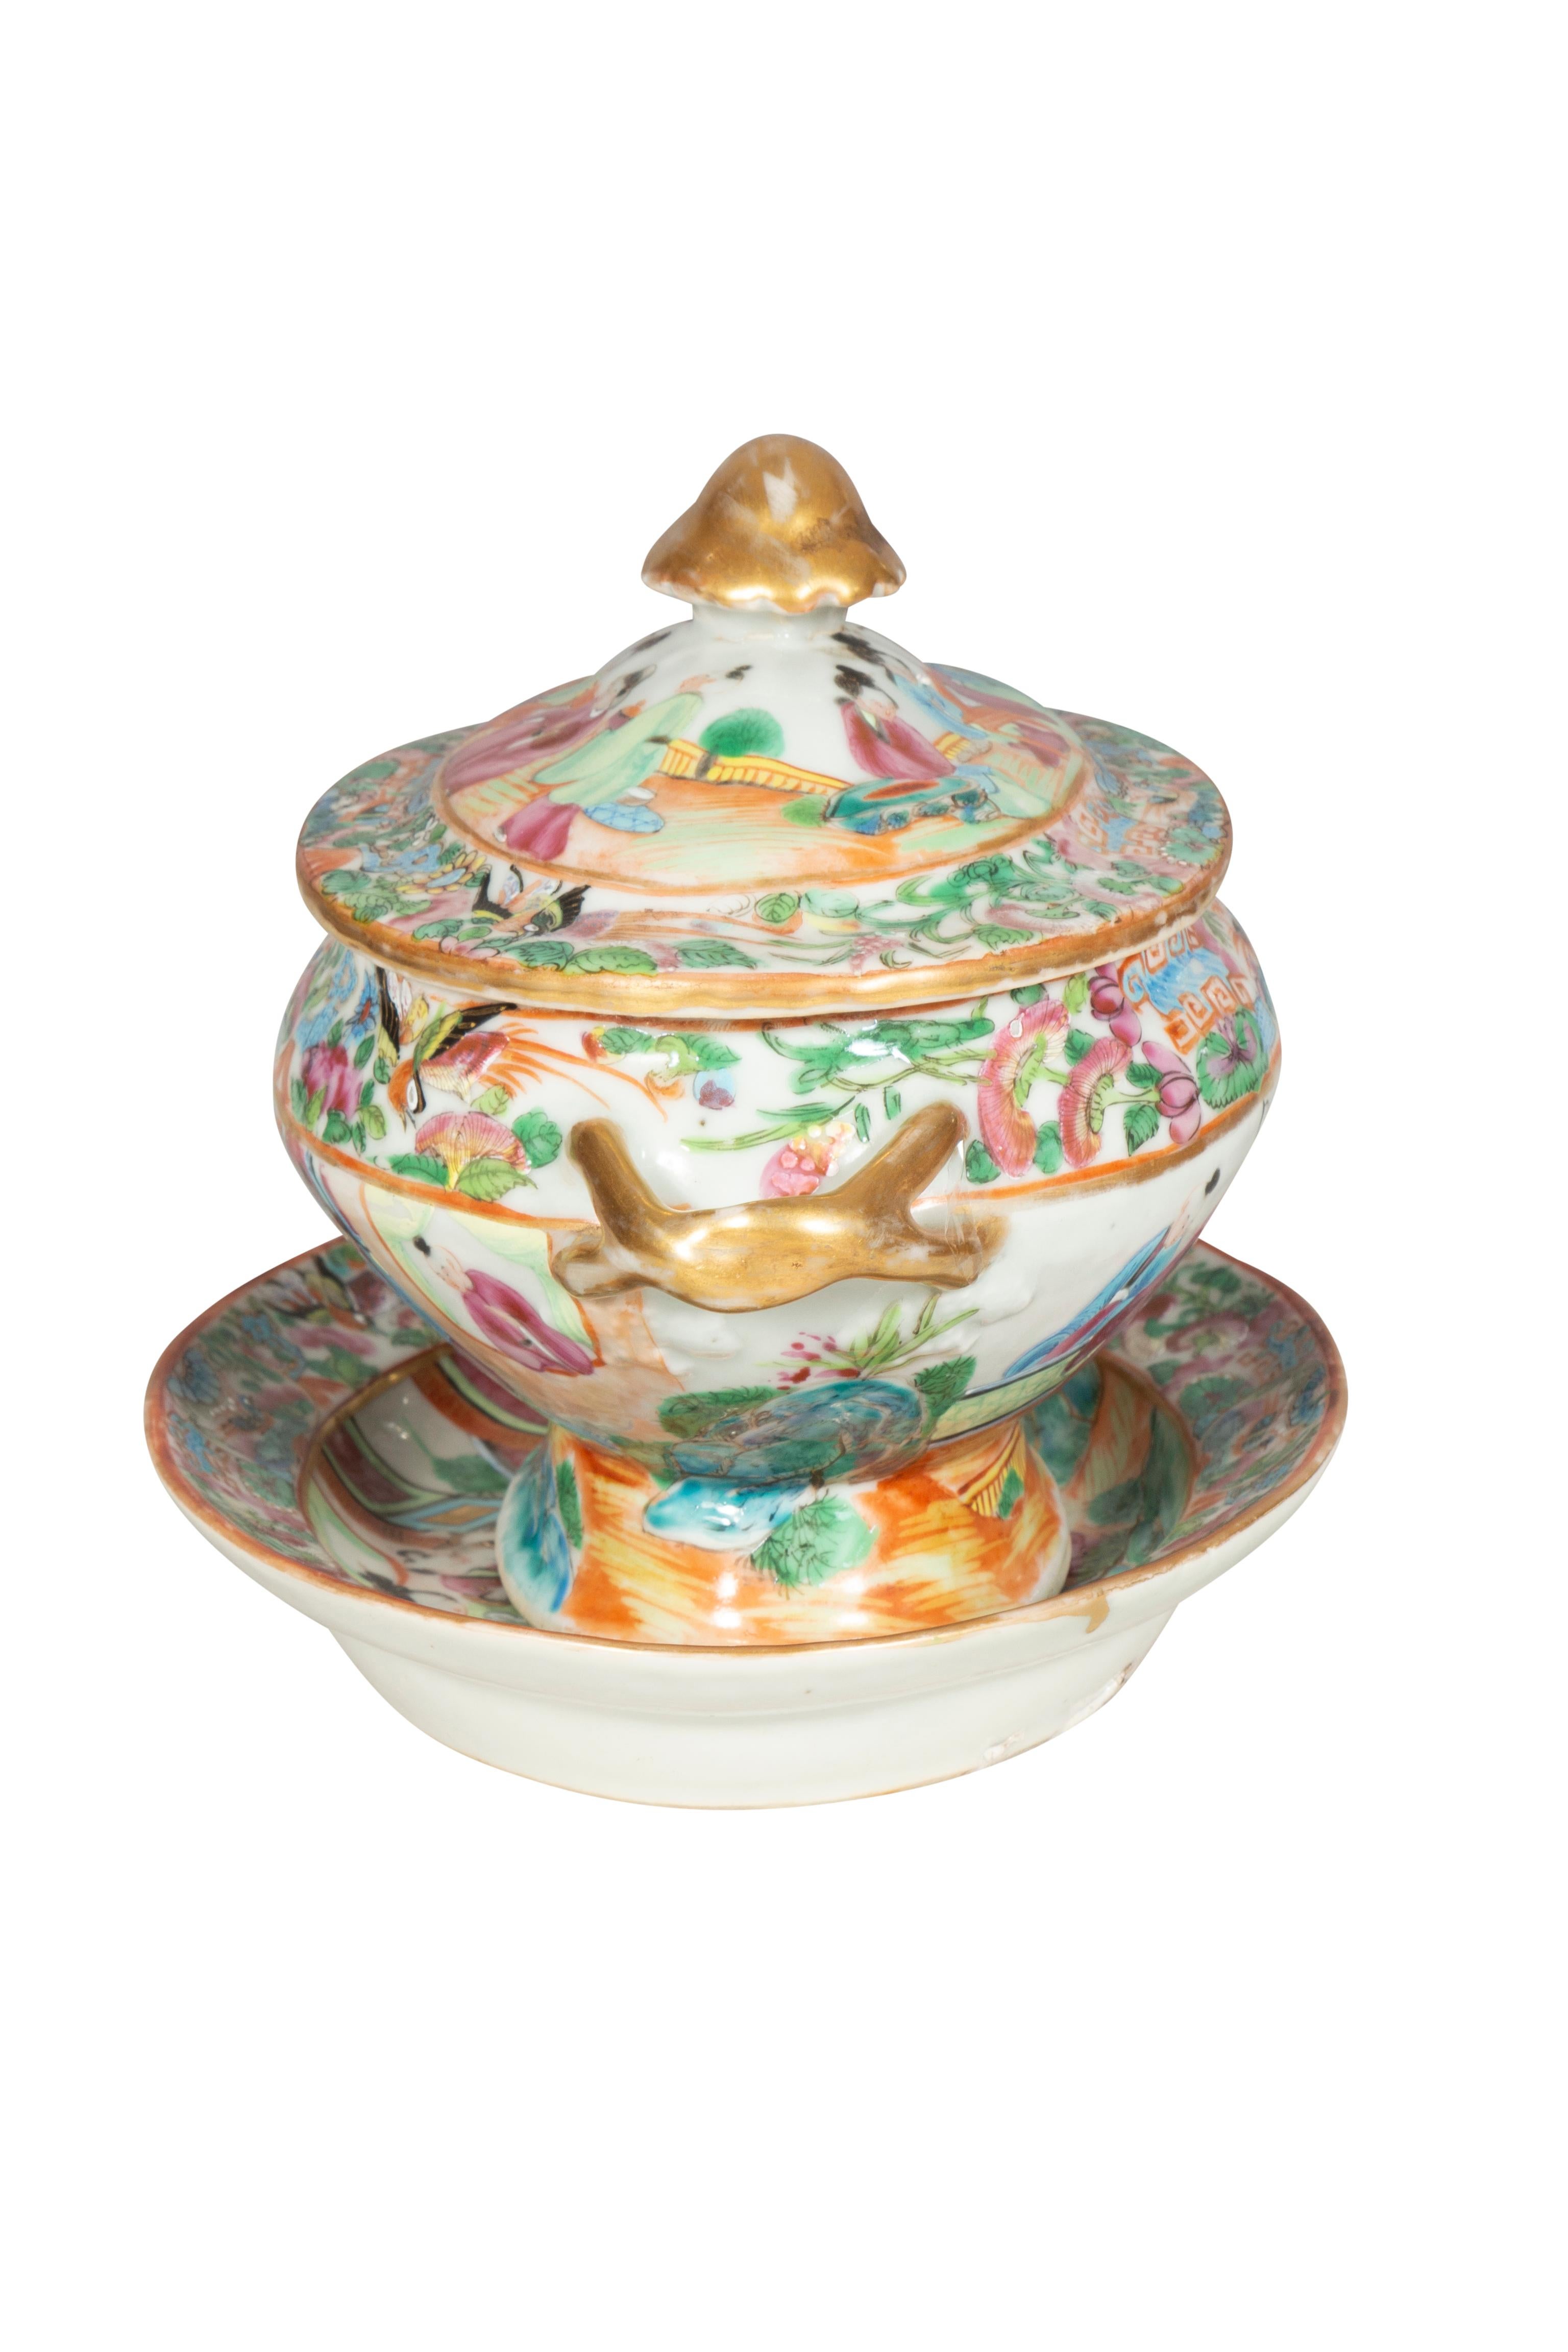 Chinese Export Rose Mandarin Sauce Tureen And Underplate In Good Condition For Sale In Essex, MA